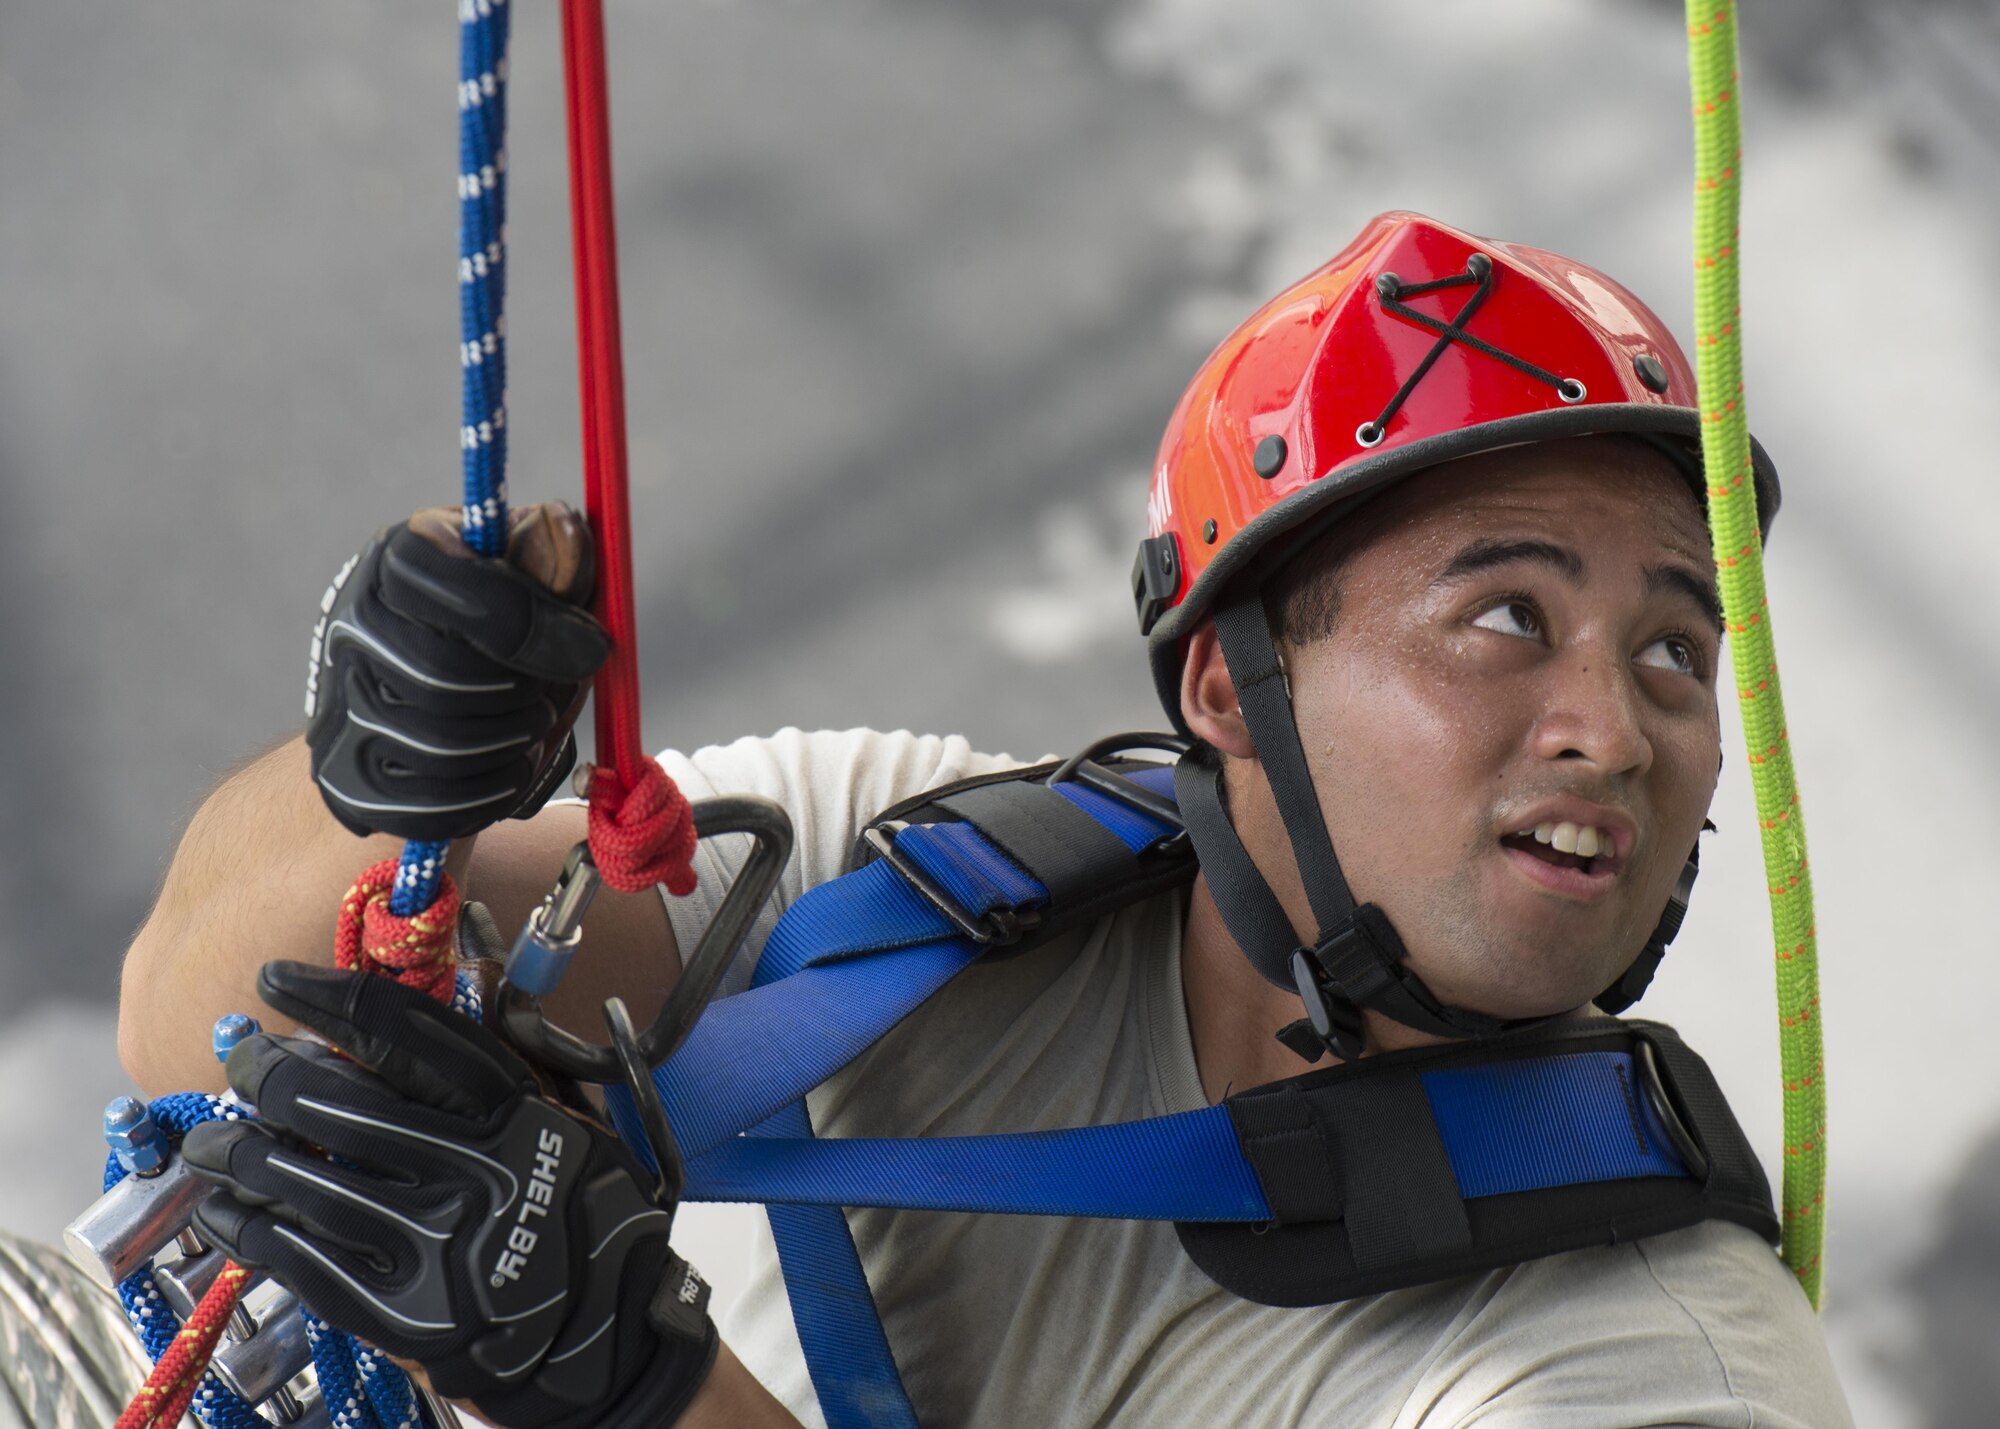 Senior Airman Jason Piol, 436th Civil Engineer Squadron firefighter, practices climbing and repelling during a Rescue Technician Course Aug. 18, 2016, at Dover Air Force Base, Del. Piol is one of 12 students who took this course. (U.S. Air Force photo by Senior Airman Zachary Cacicia)